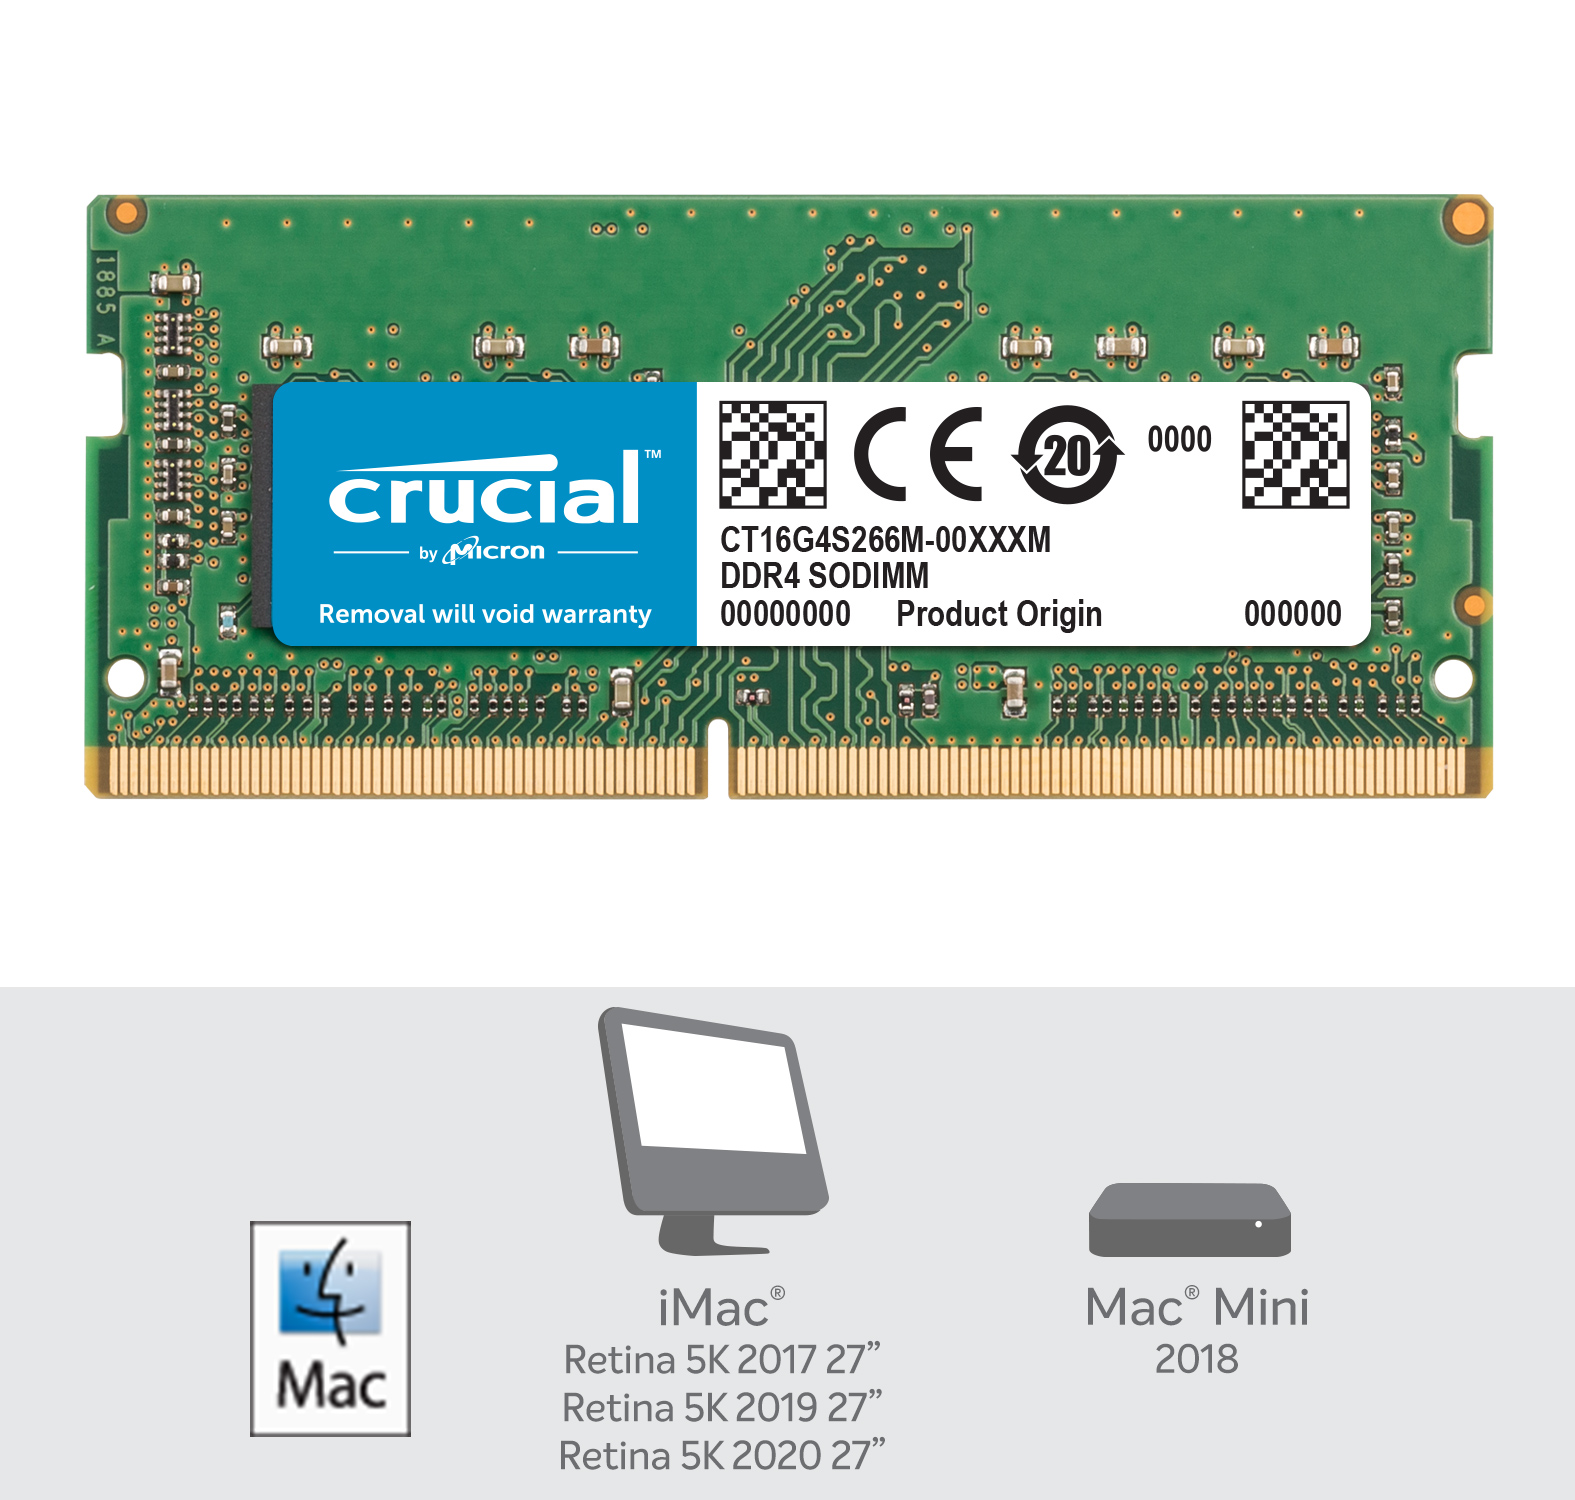 https://www.crucial.com/content/dam/crucial/dram-products/mac/images/compatibility/CT16G4S266M-crucial-memory-for-mac-compatibility-image.jpg